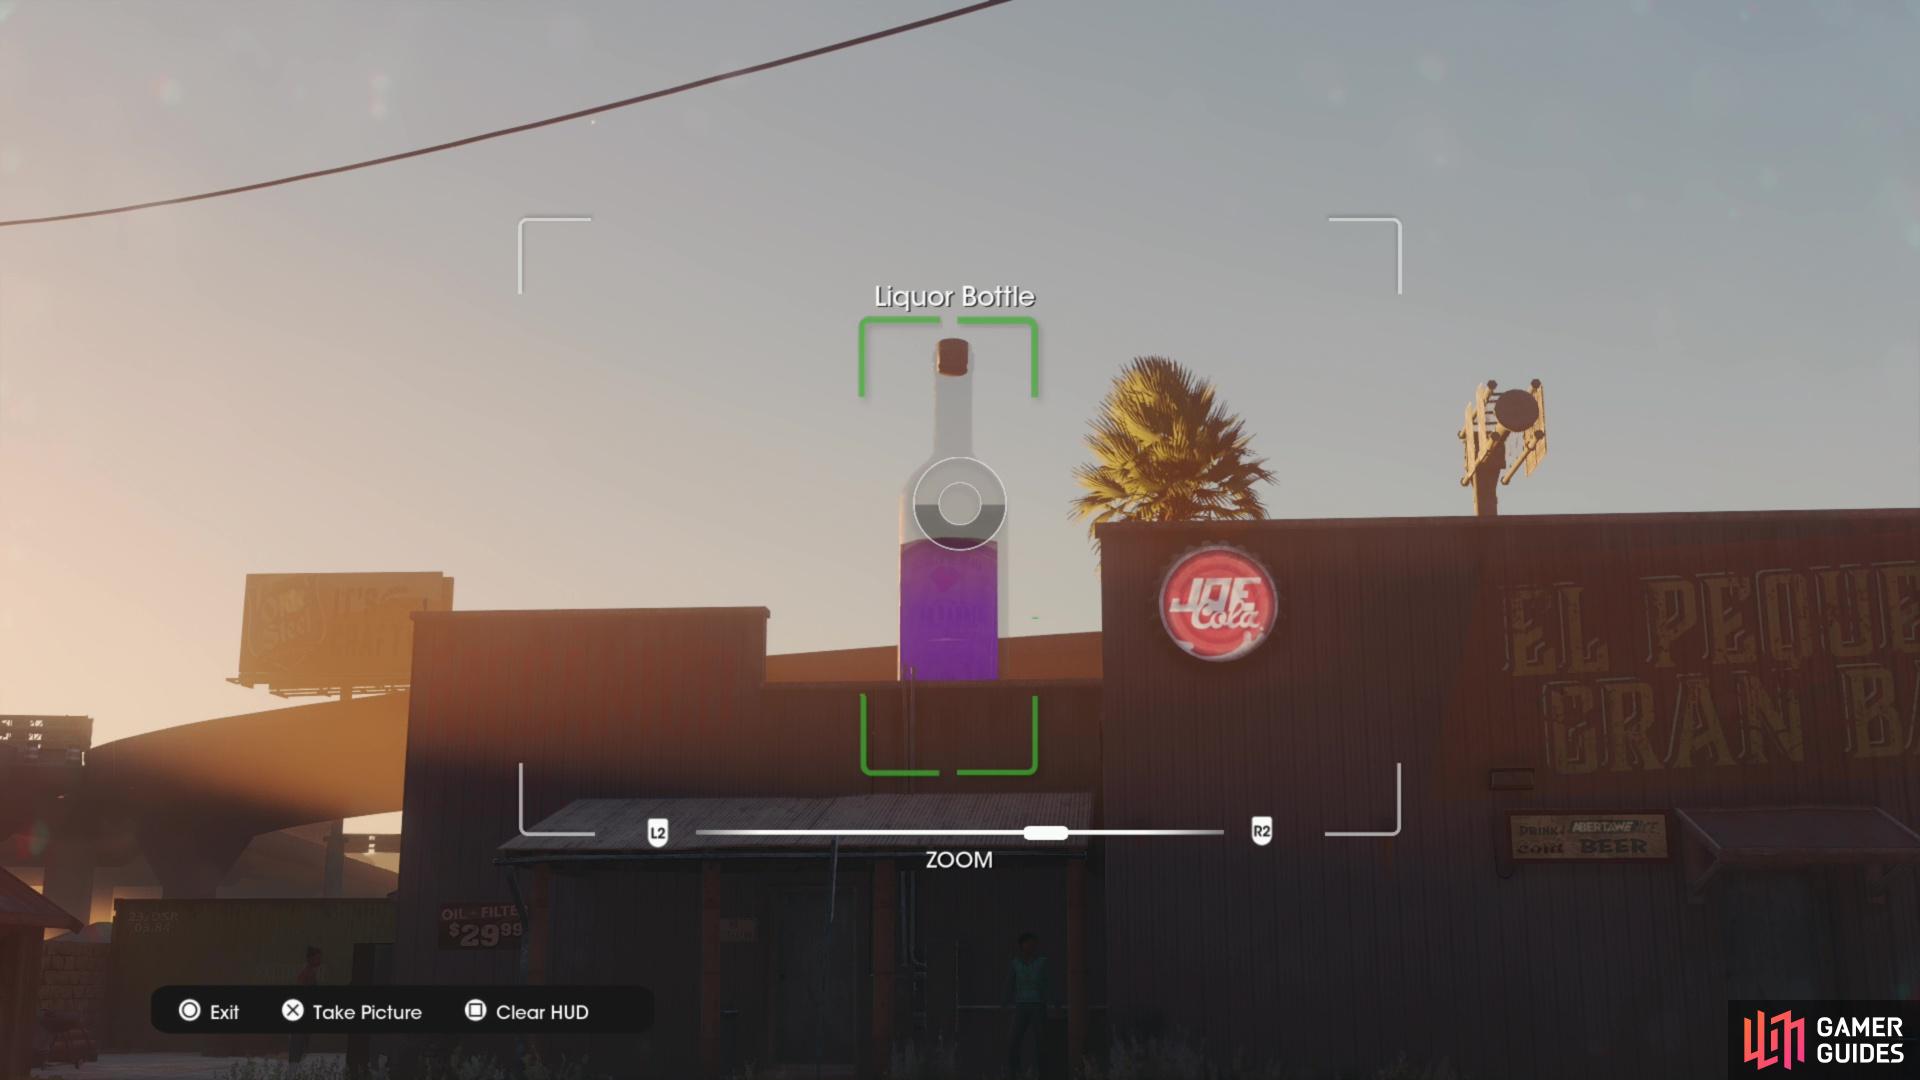 Take a picture of the Liquor Bottle collectible to obtain it.